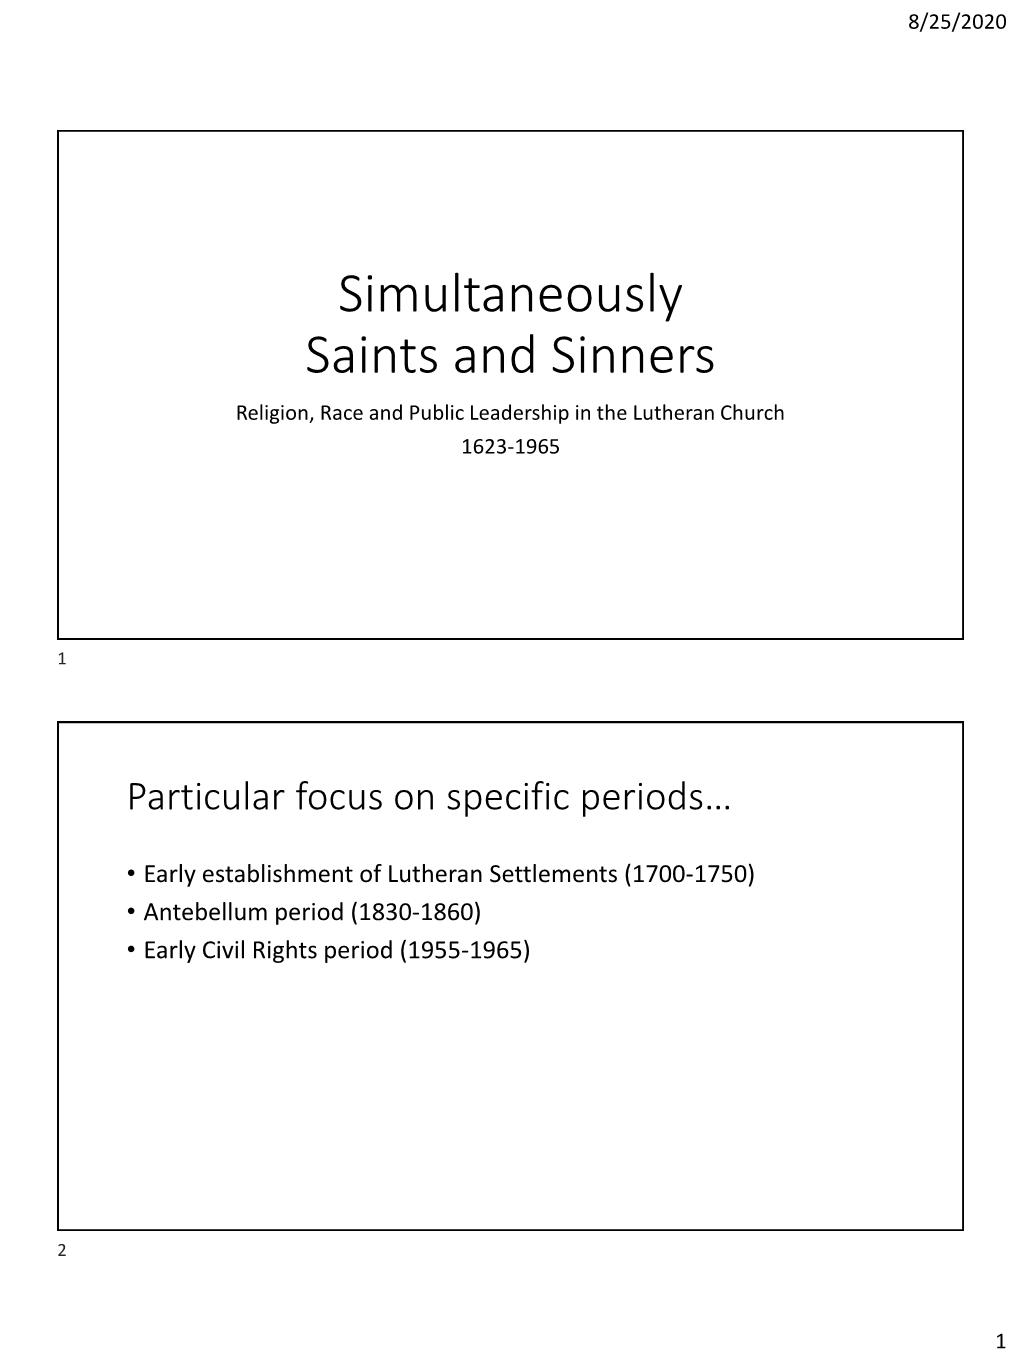 Simultaneously Saints and Sinners Religion, Race and Public Leadership in the Lutheran Church 1623-1965